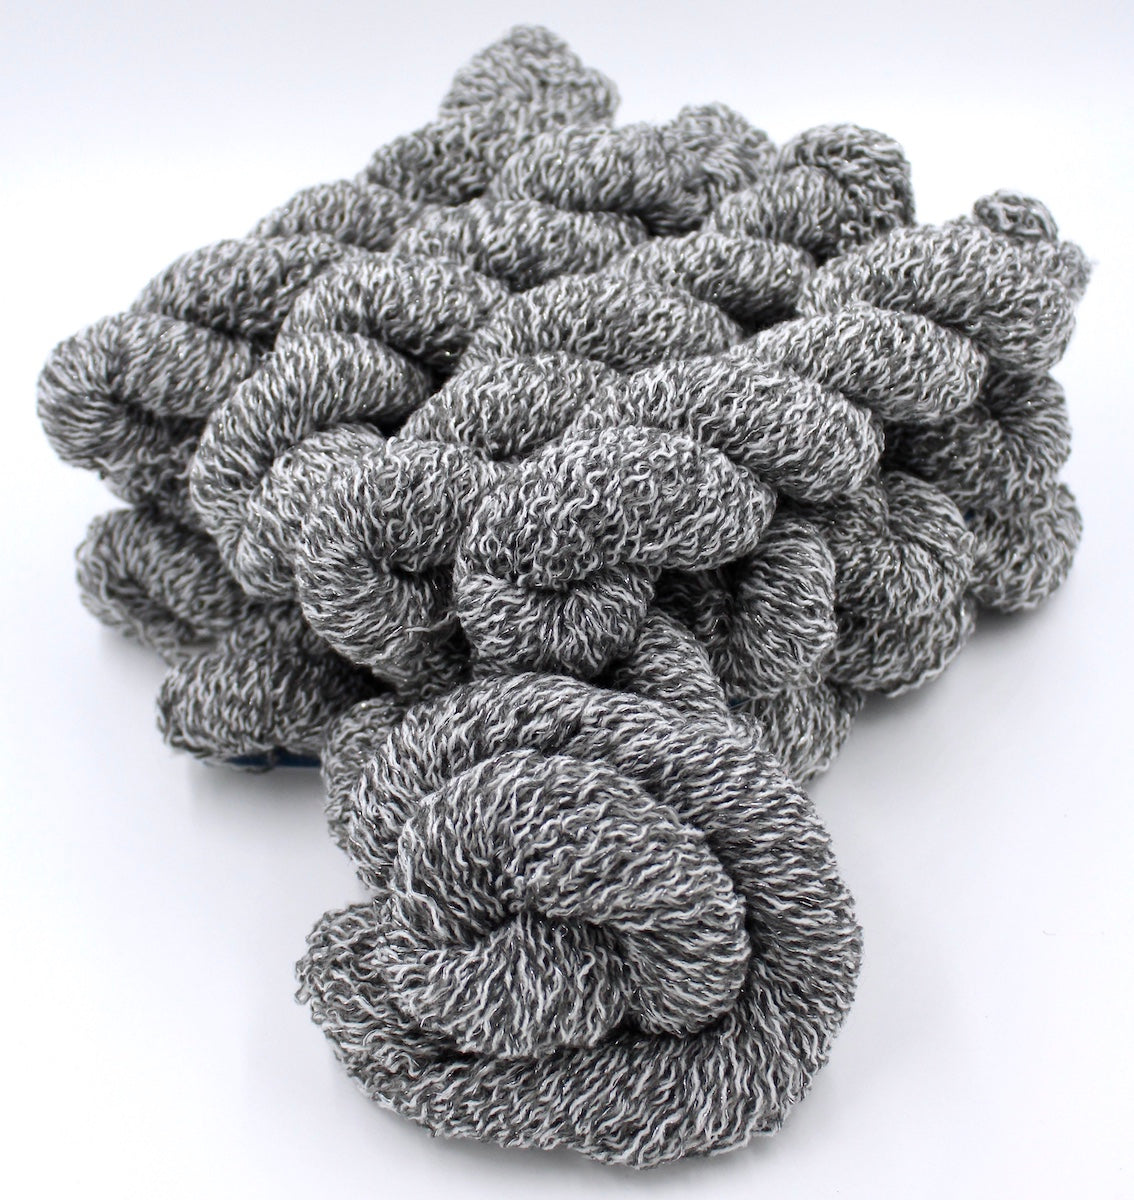 Several skeins of Vegan, White and Grey Variegated, Acrylic, Polyester, Sparkle, Sport weight recycled by hand from unwanted sweaters stacked on top of each other attractively. 